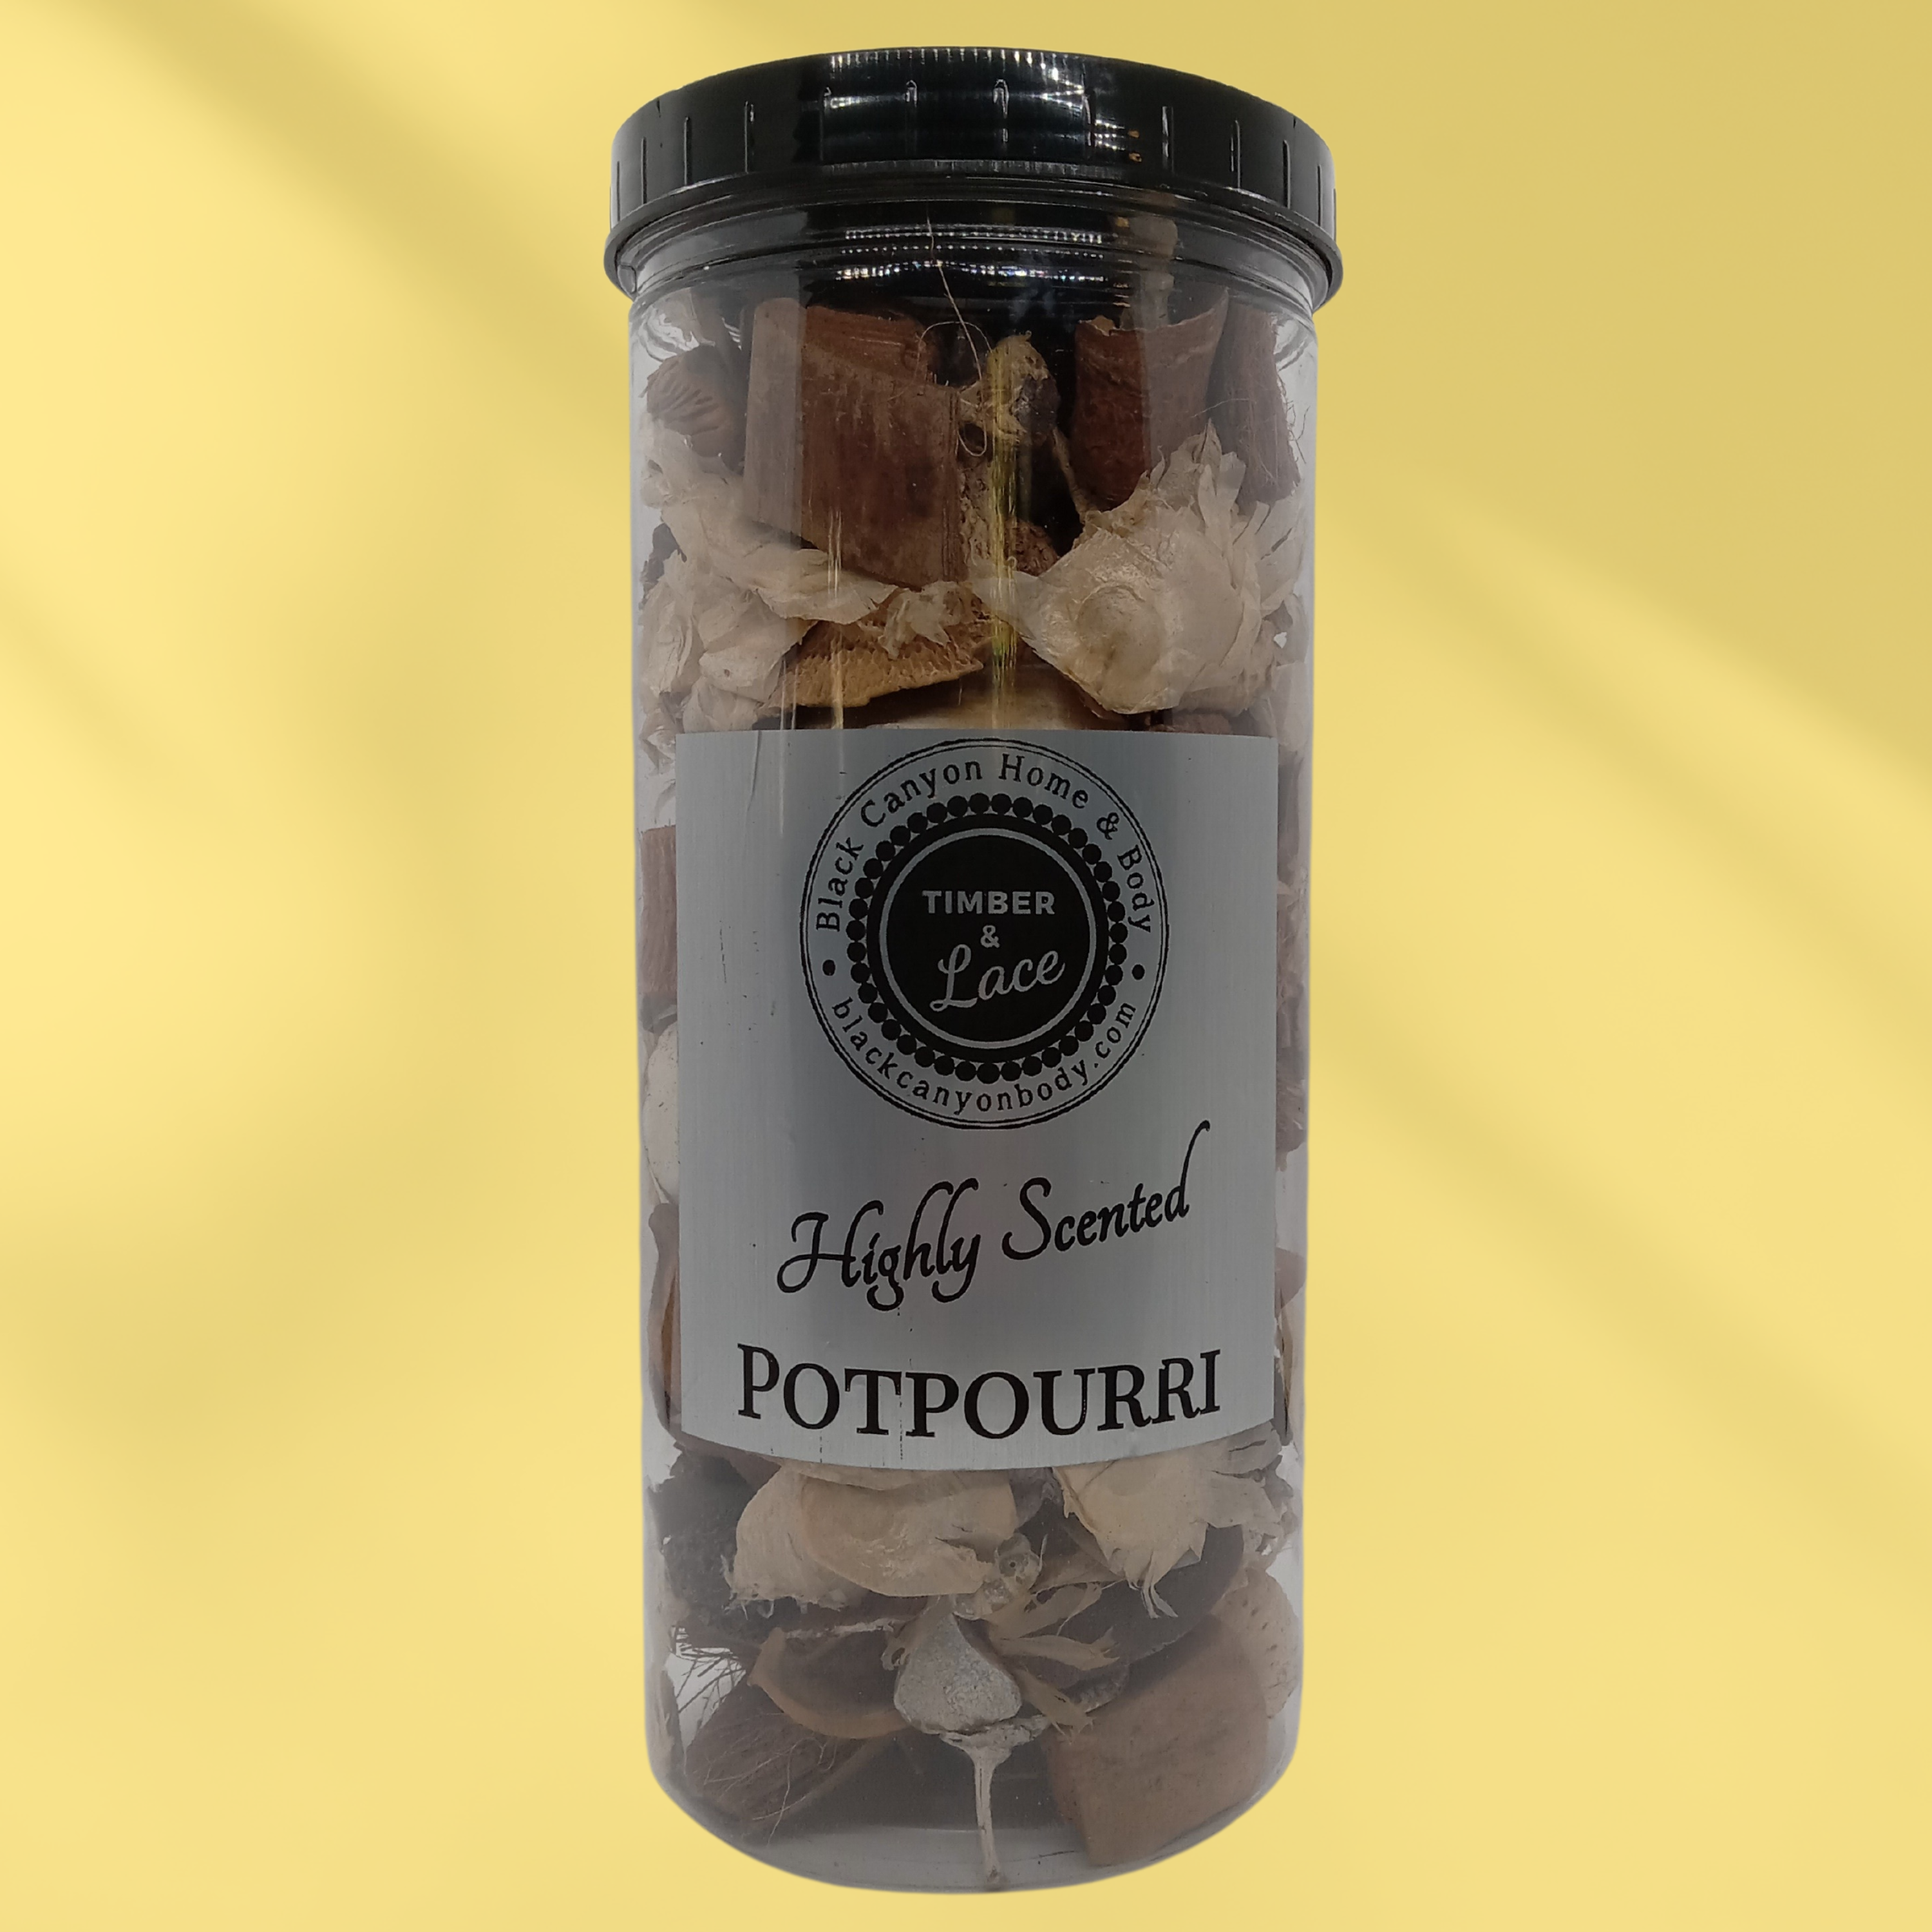 Timber & Lace Sugared Pineapple Scented Scented Potpourri